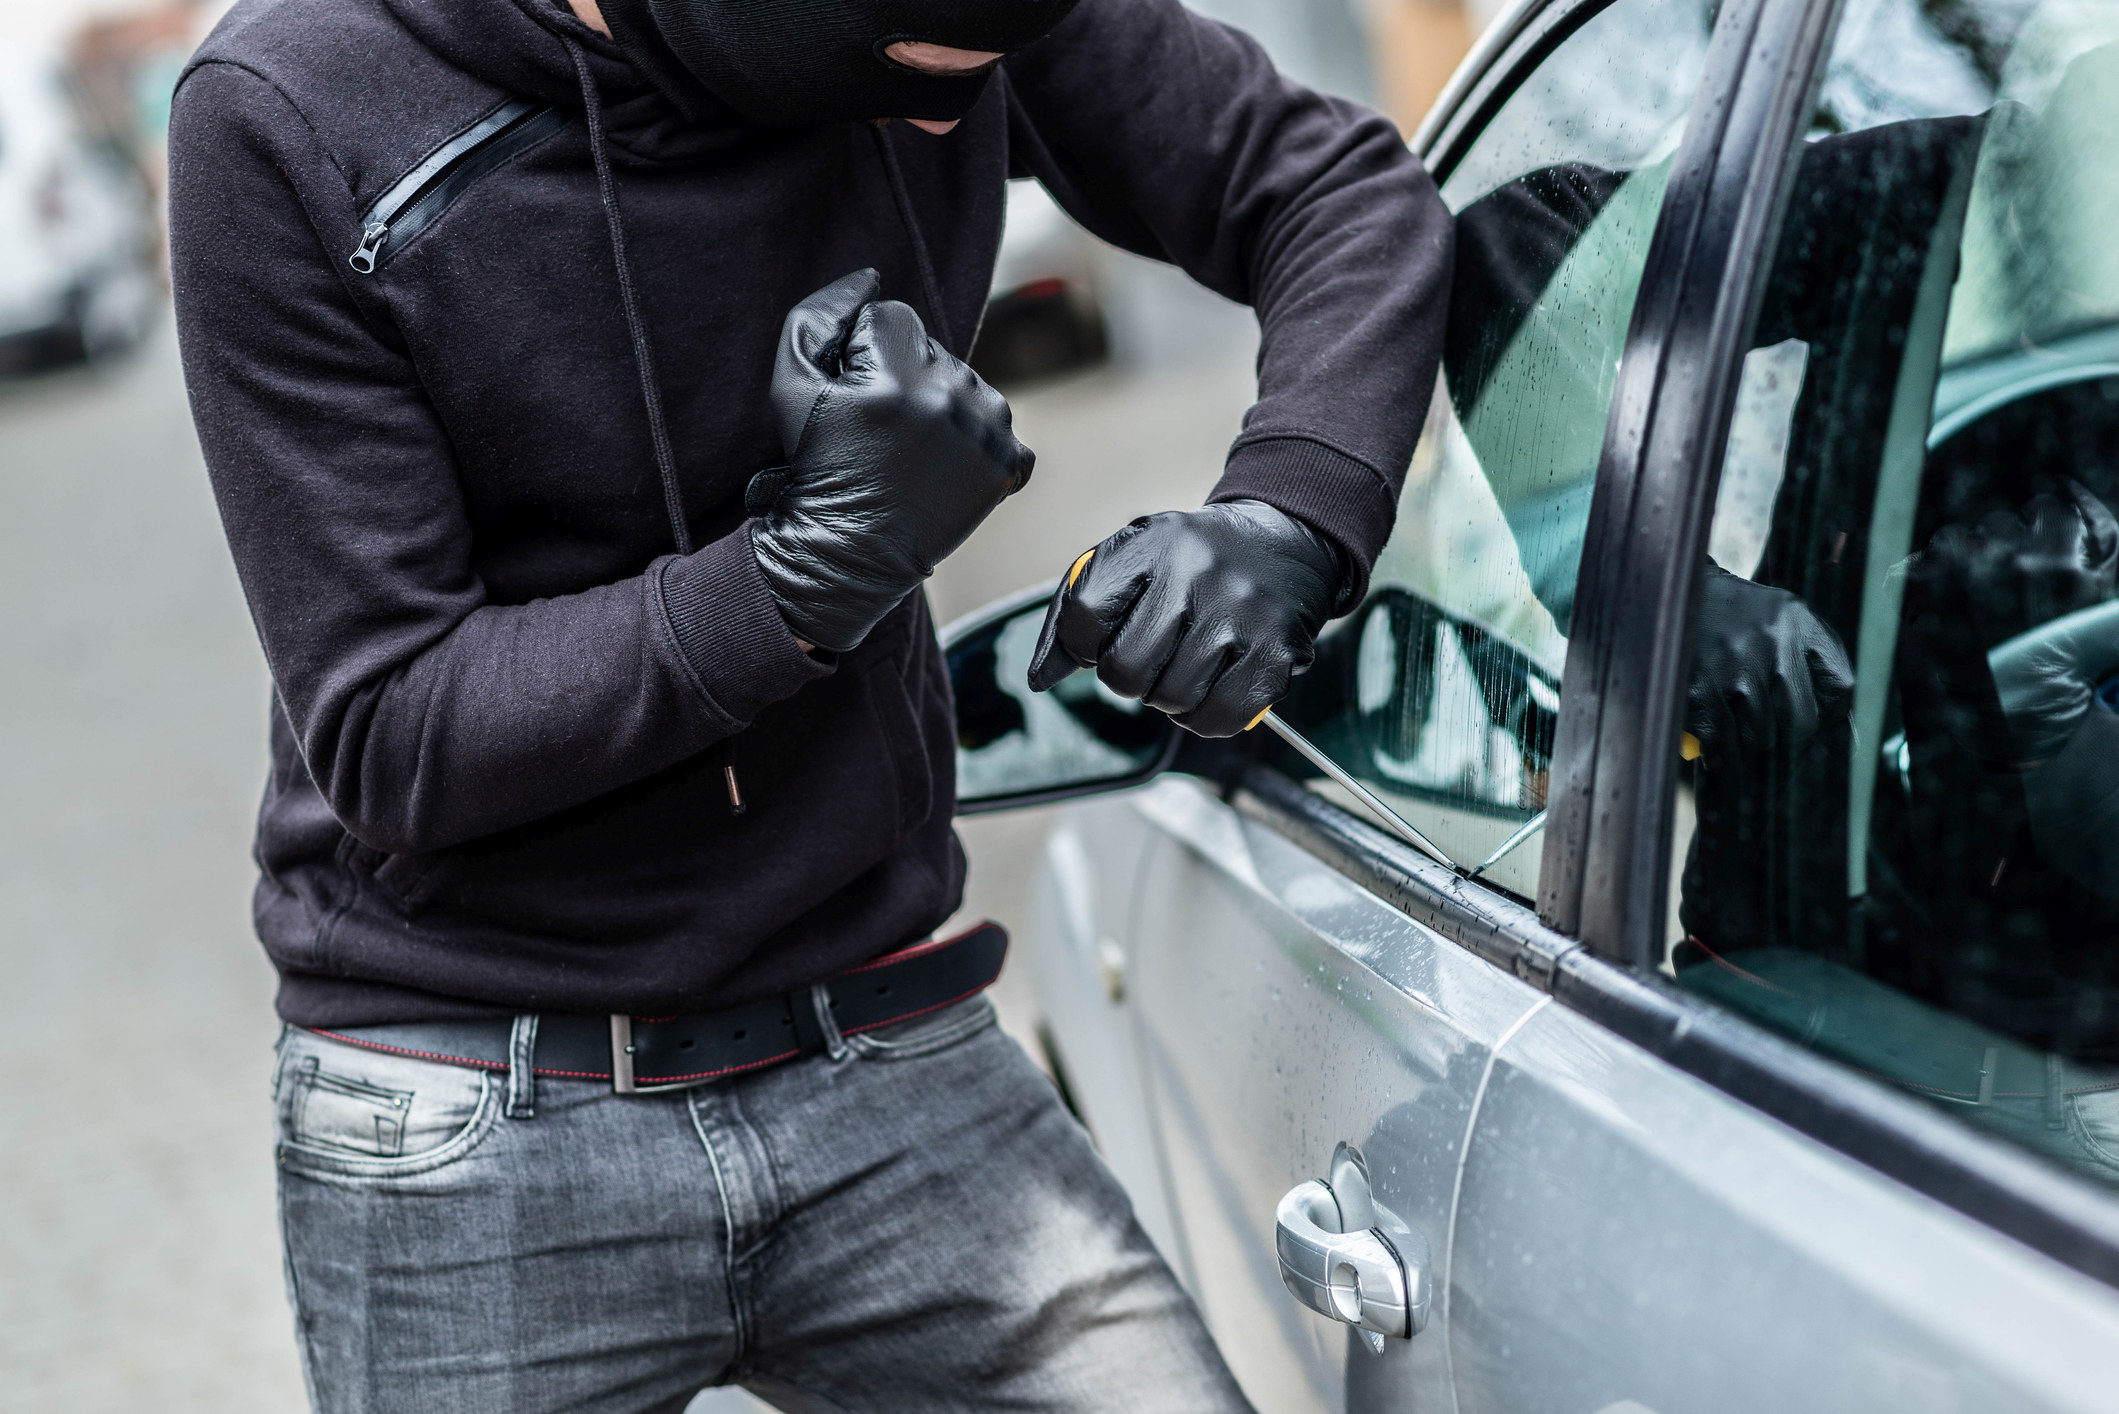 A man breaking into a car.